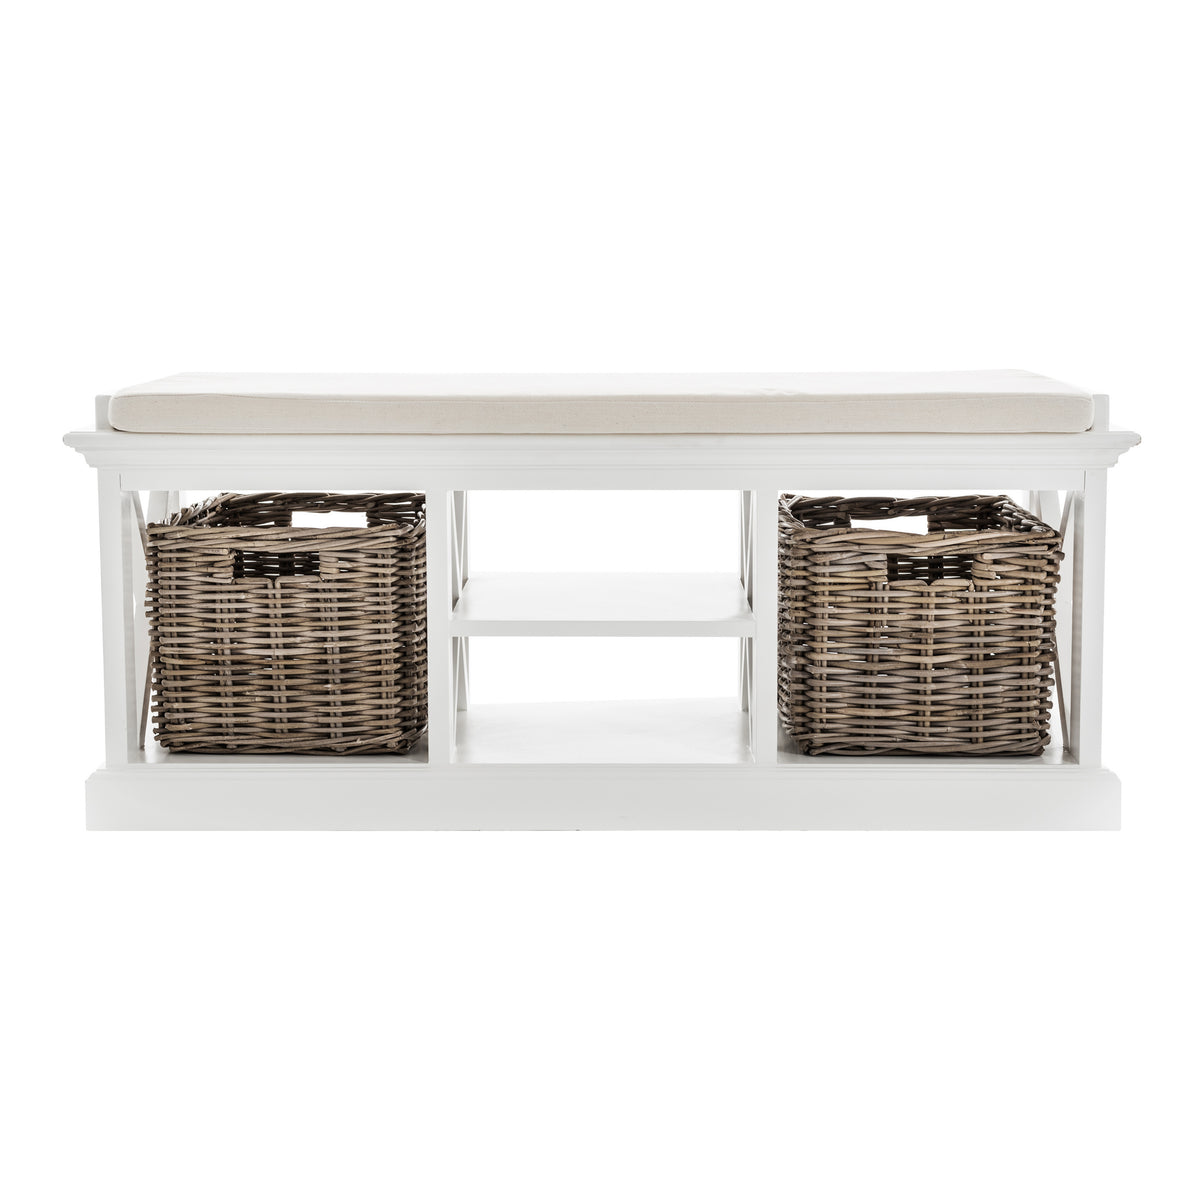 Halifax Mahogany Timber Bench with 2 Rattan Baskets - Classic White - Notbrand